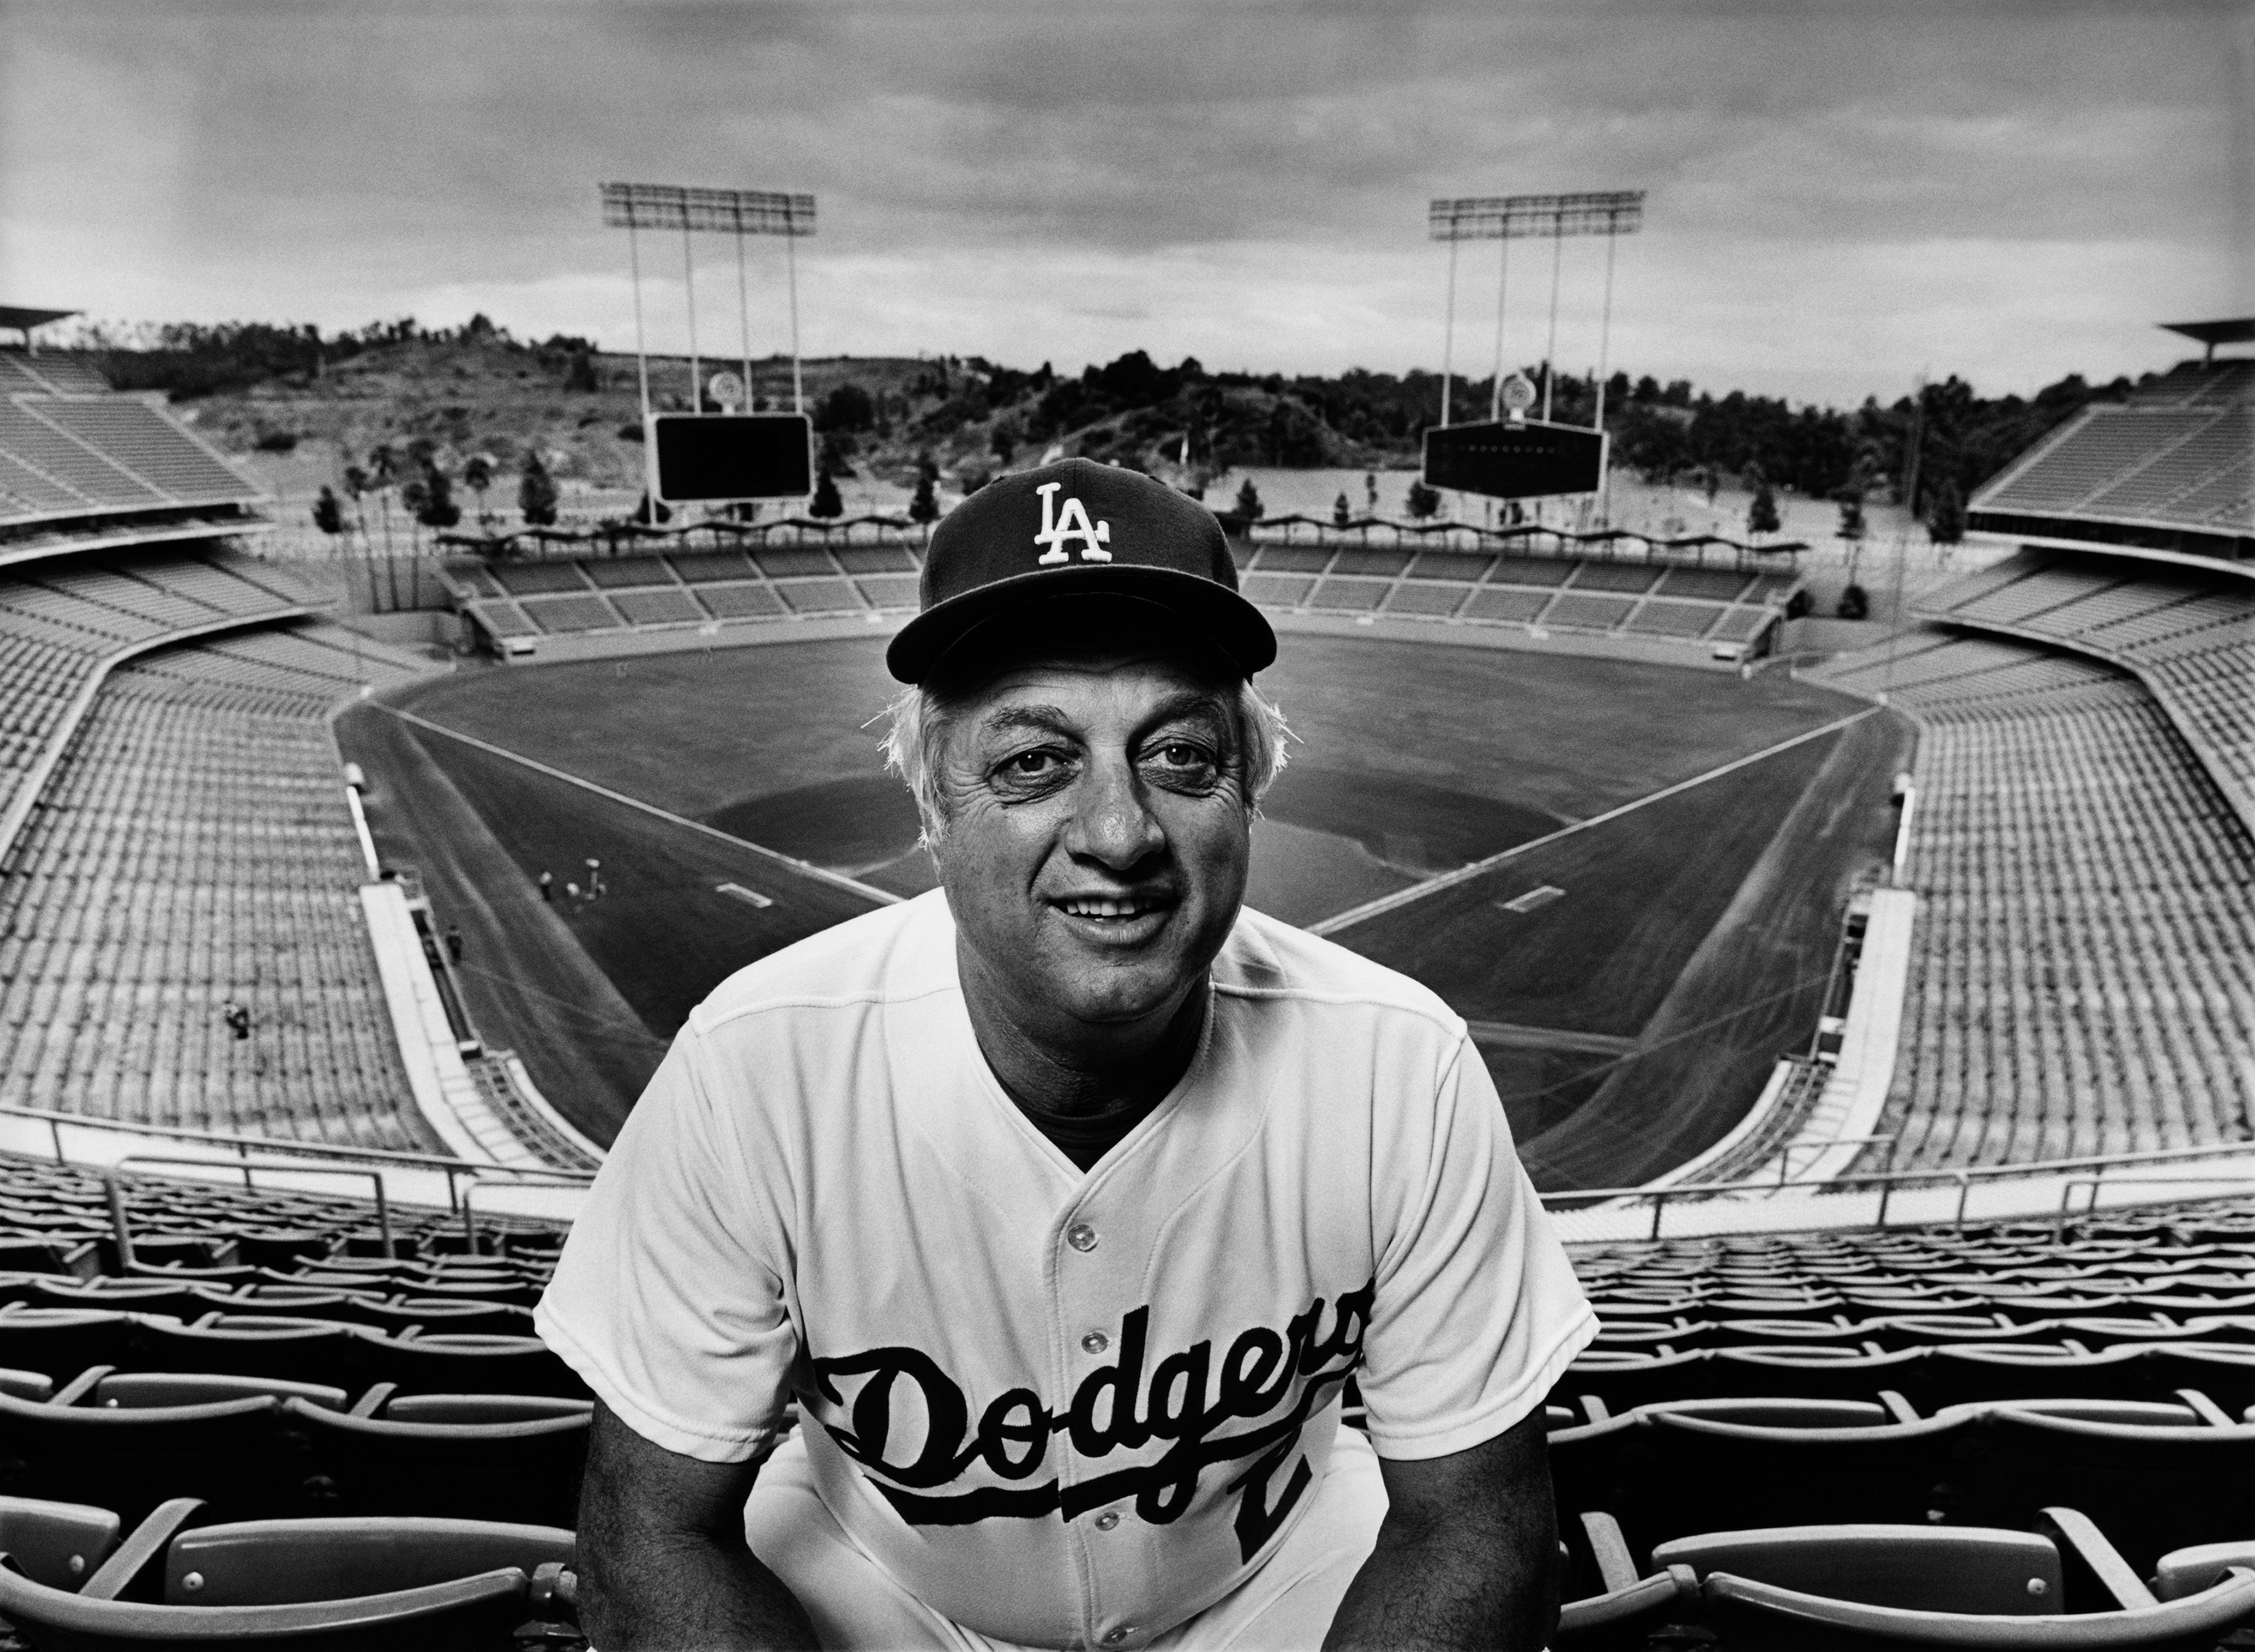 Dodgers Paying Tribute to Tommy Lasorda